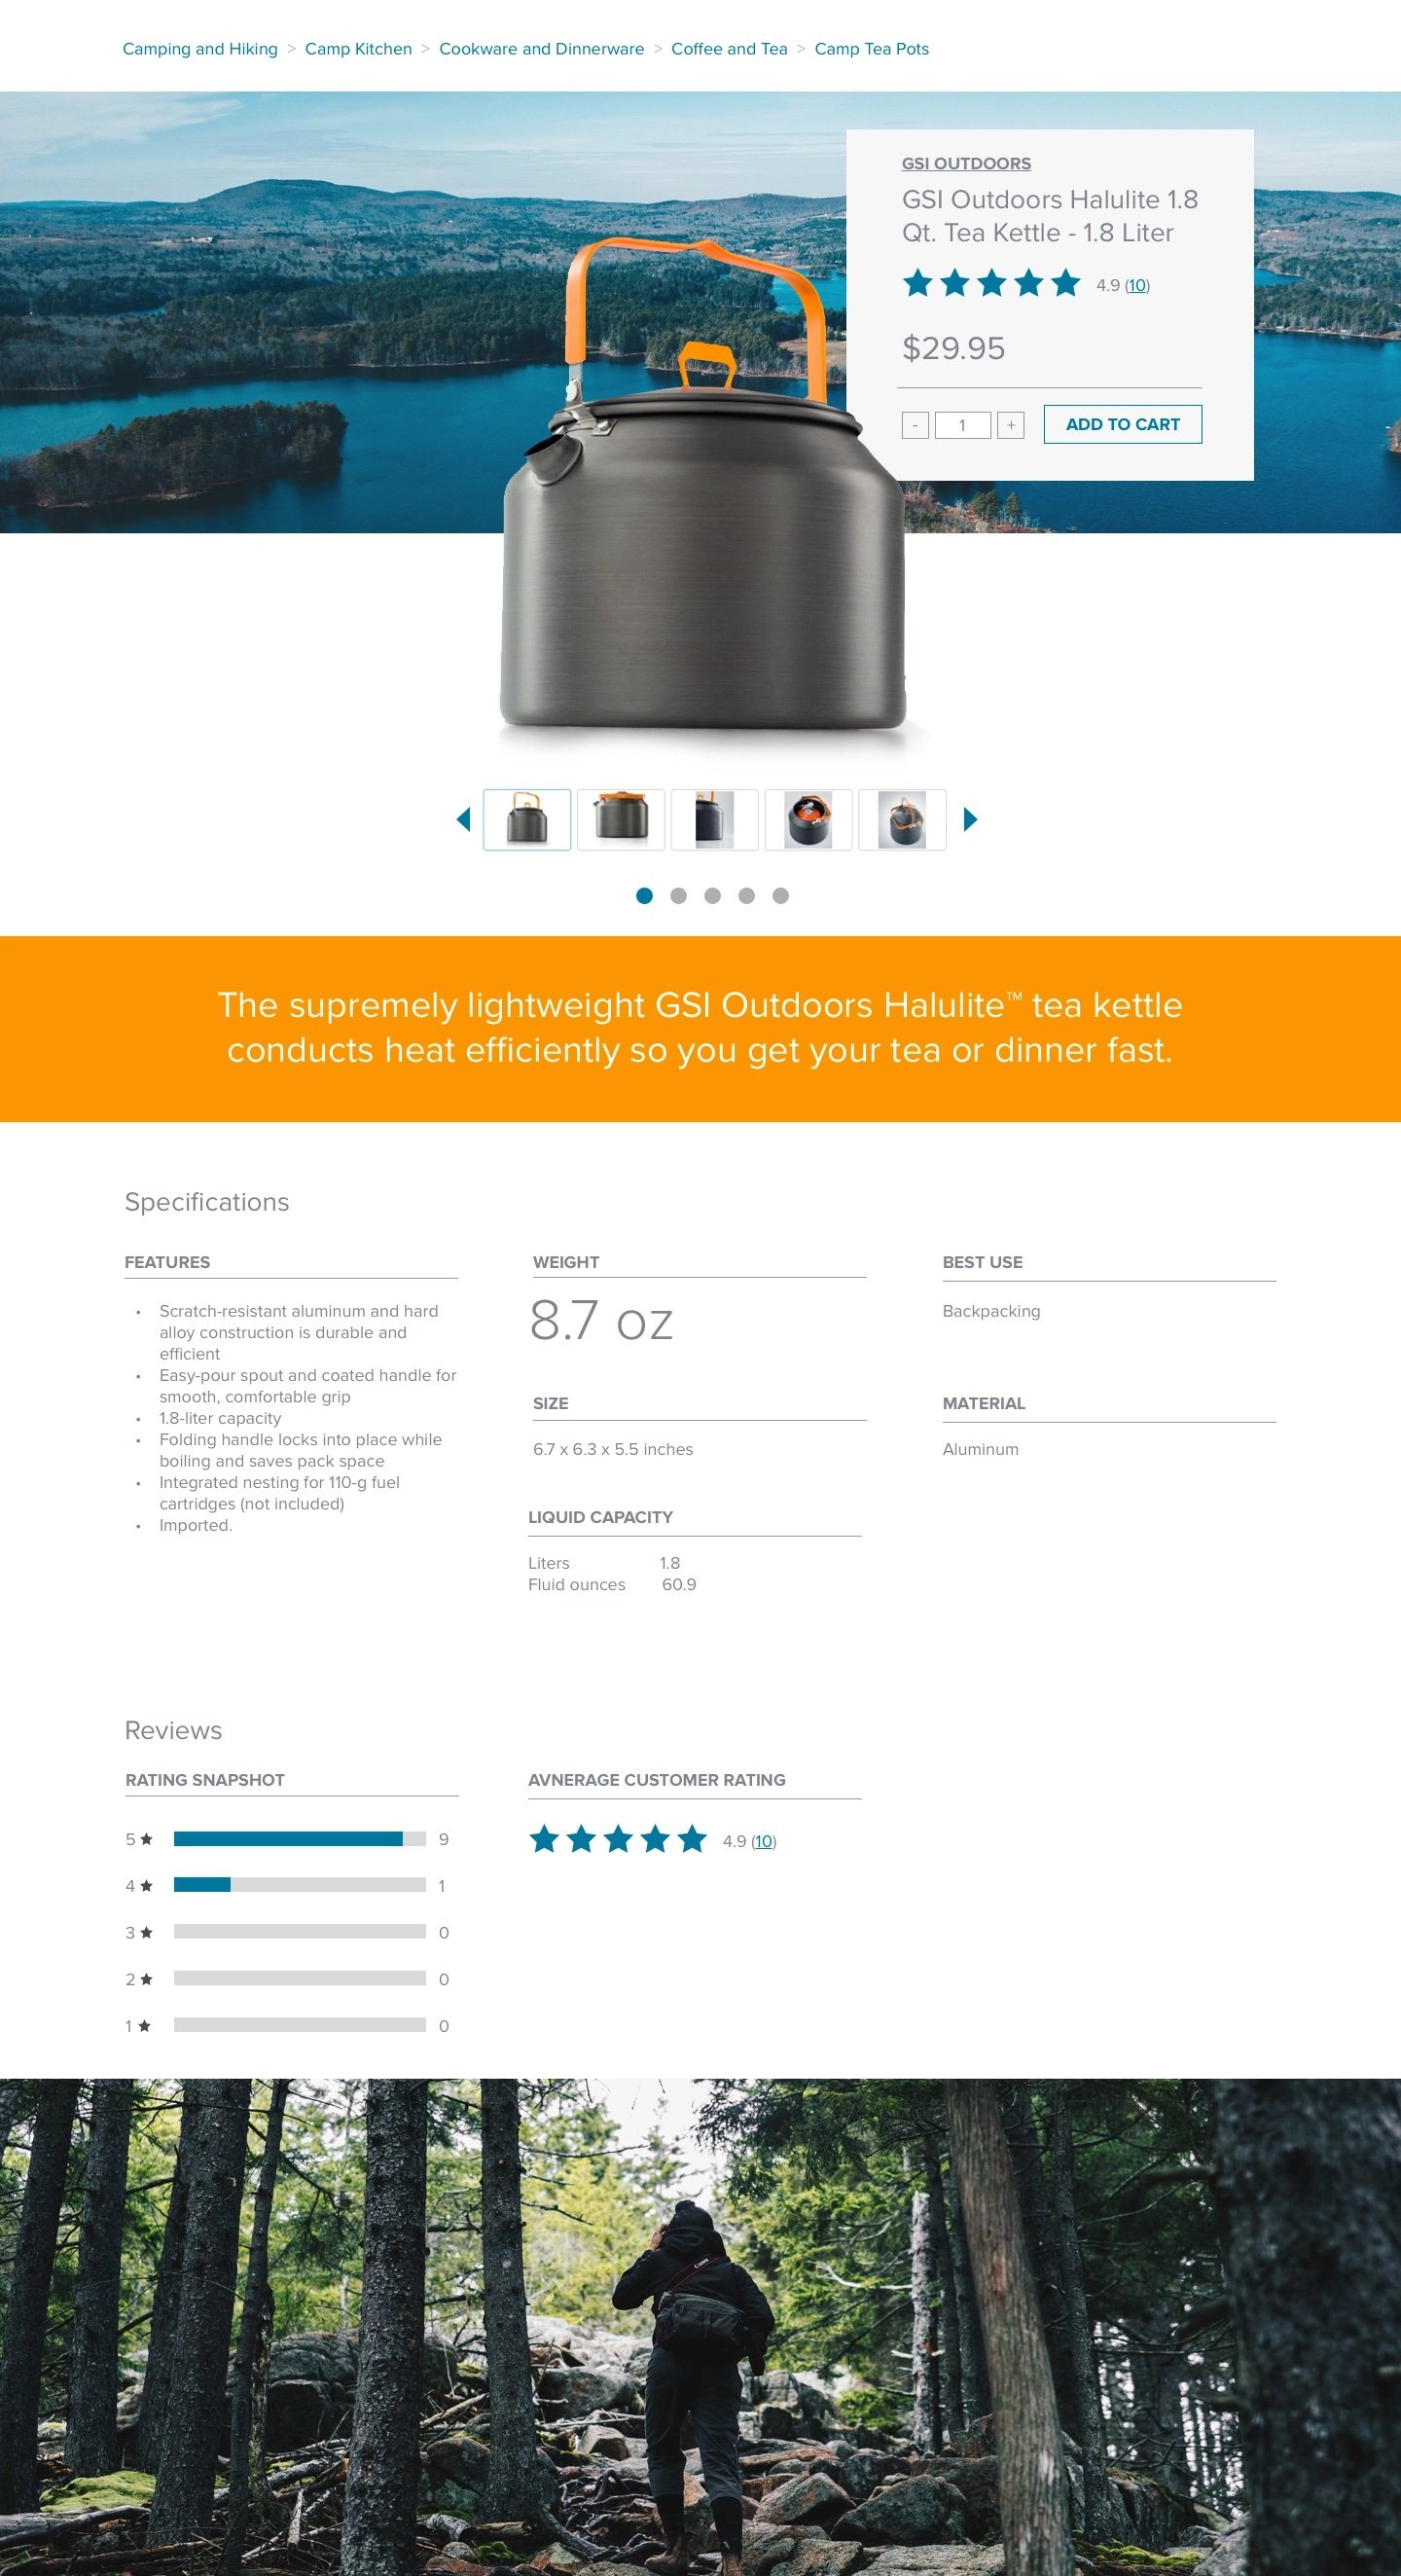  Product detail page design 